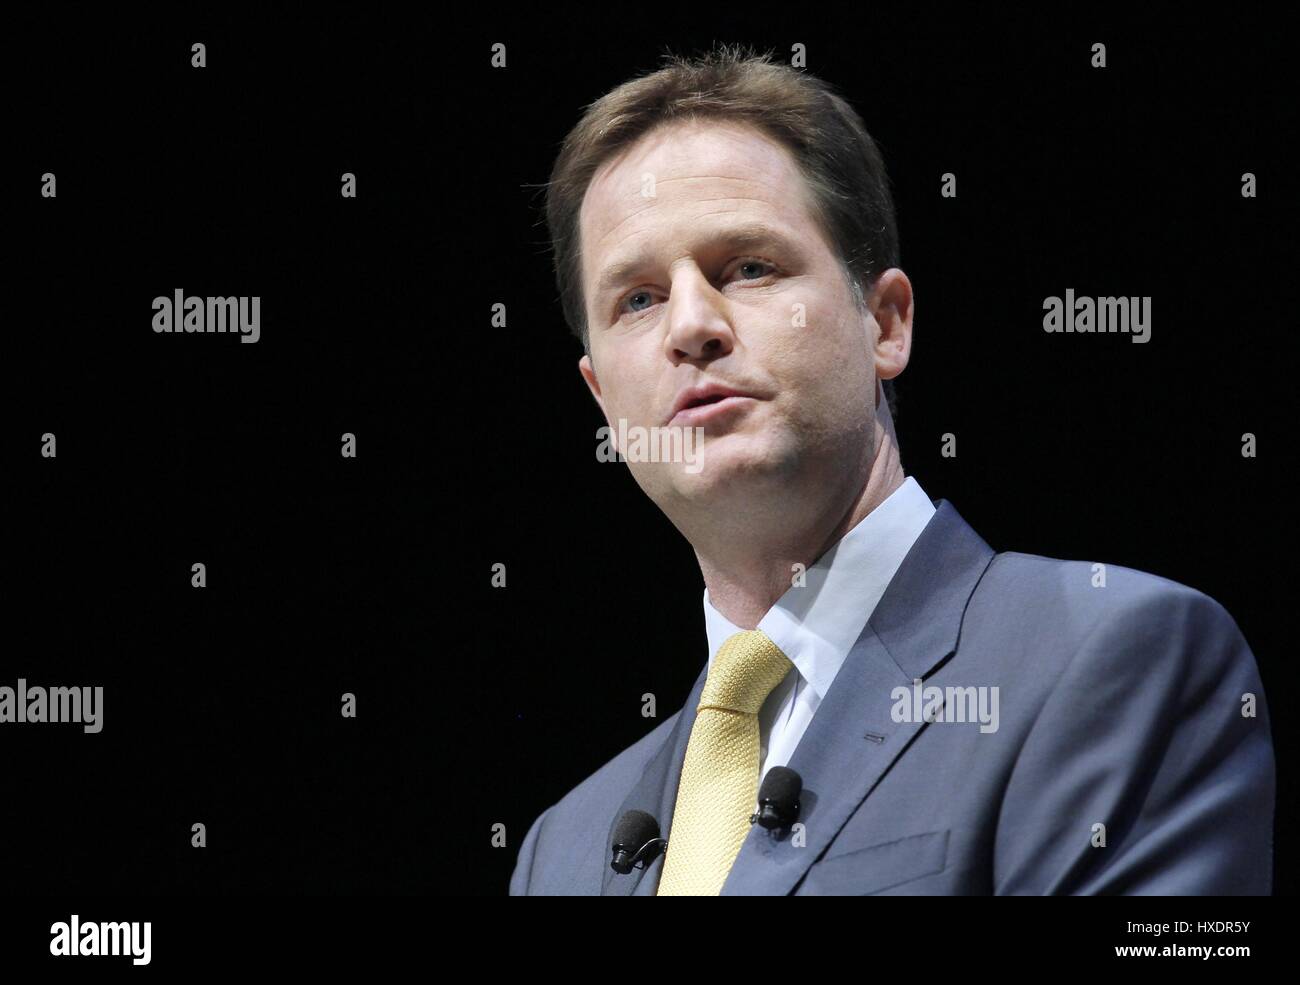 NICK CLEGG MP LIBERAL DEMOCRAT LEADER 20 September 2010 THE AAC LIVERPOOL ENGLAND Stock Photo